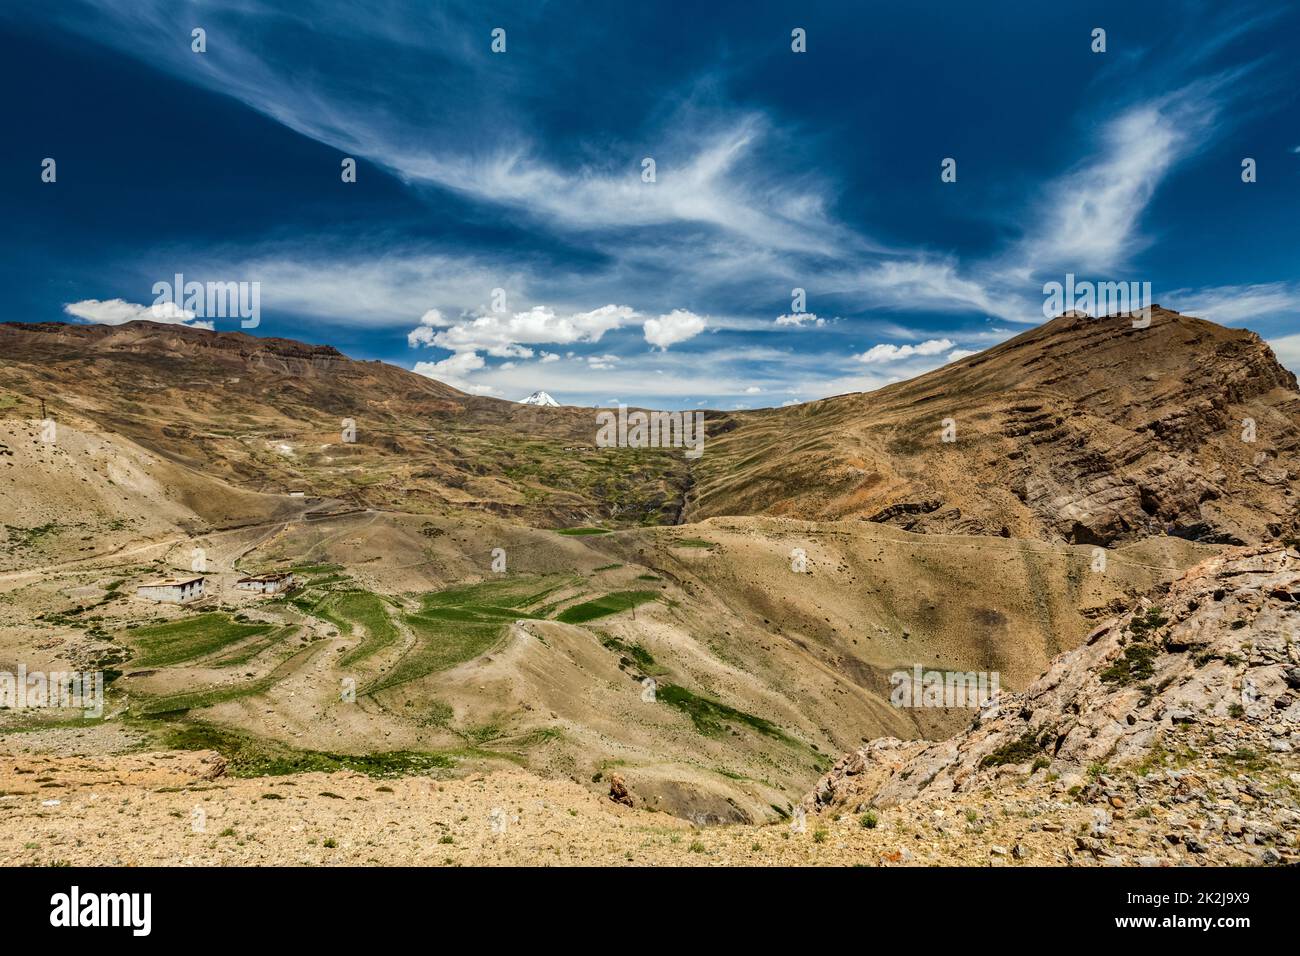 View of Gete village in Spiti valley in Himalayas. Spiti valley, Himachal Pradesh, India Stock Photo